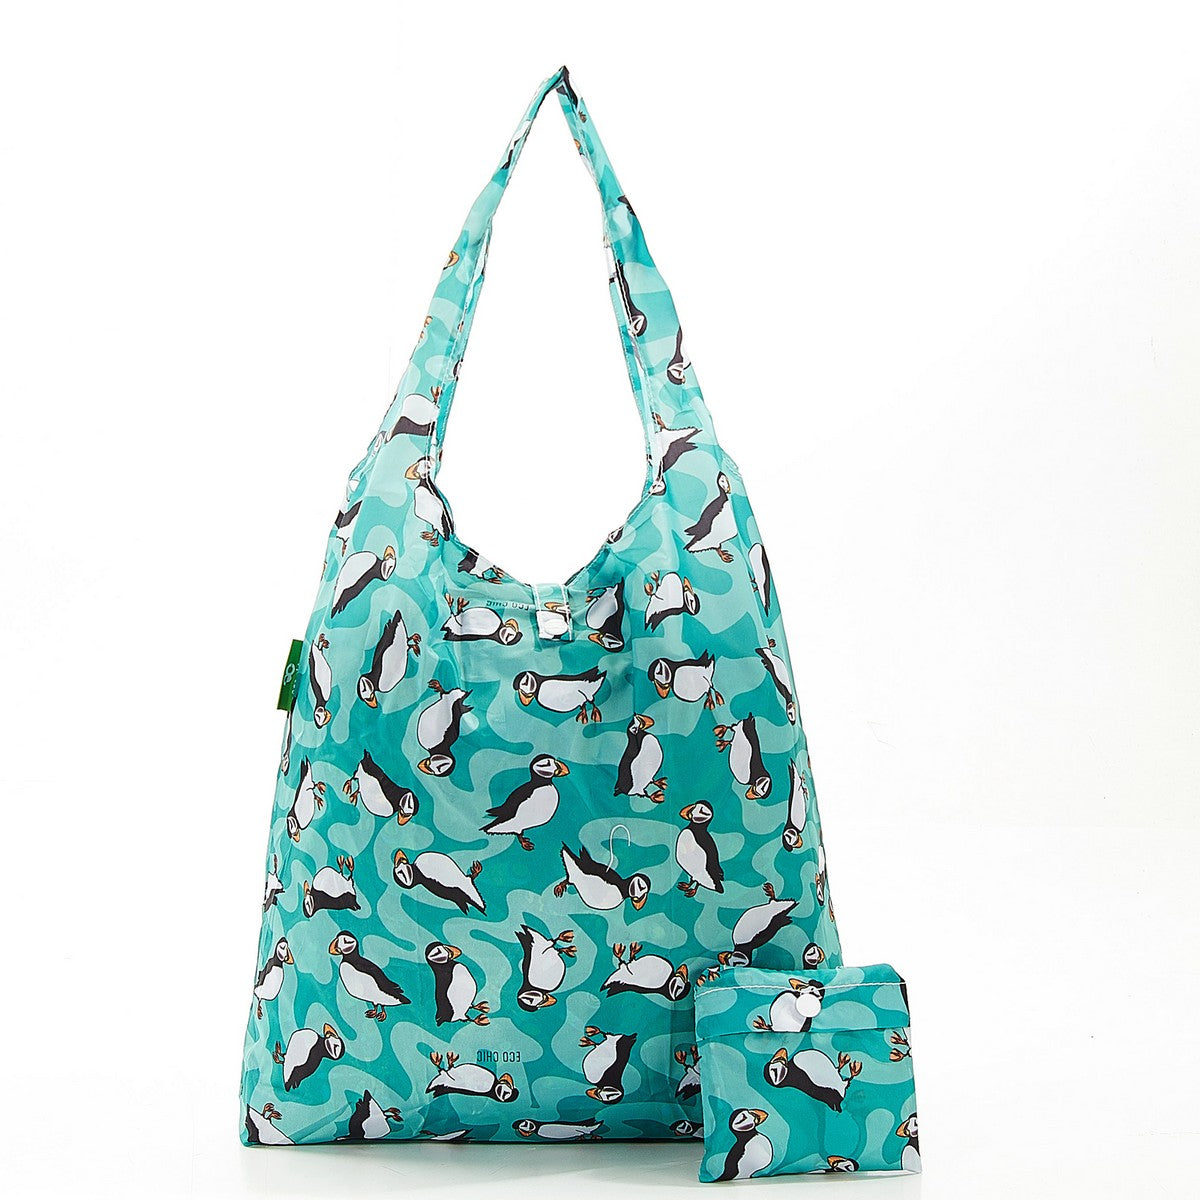 FOLDABLE SHOPPER - TEAL PUFFIN